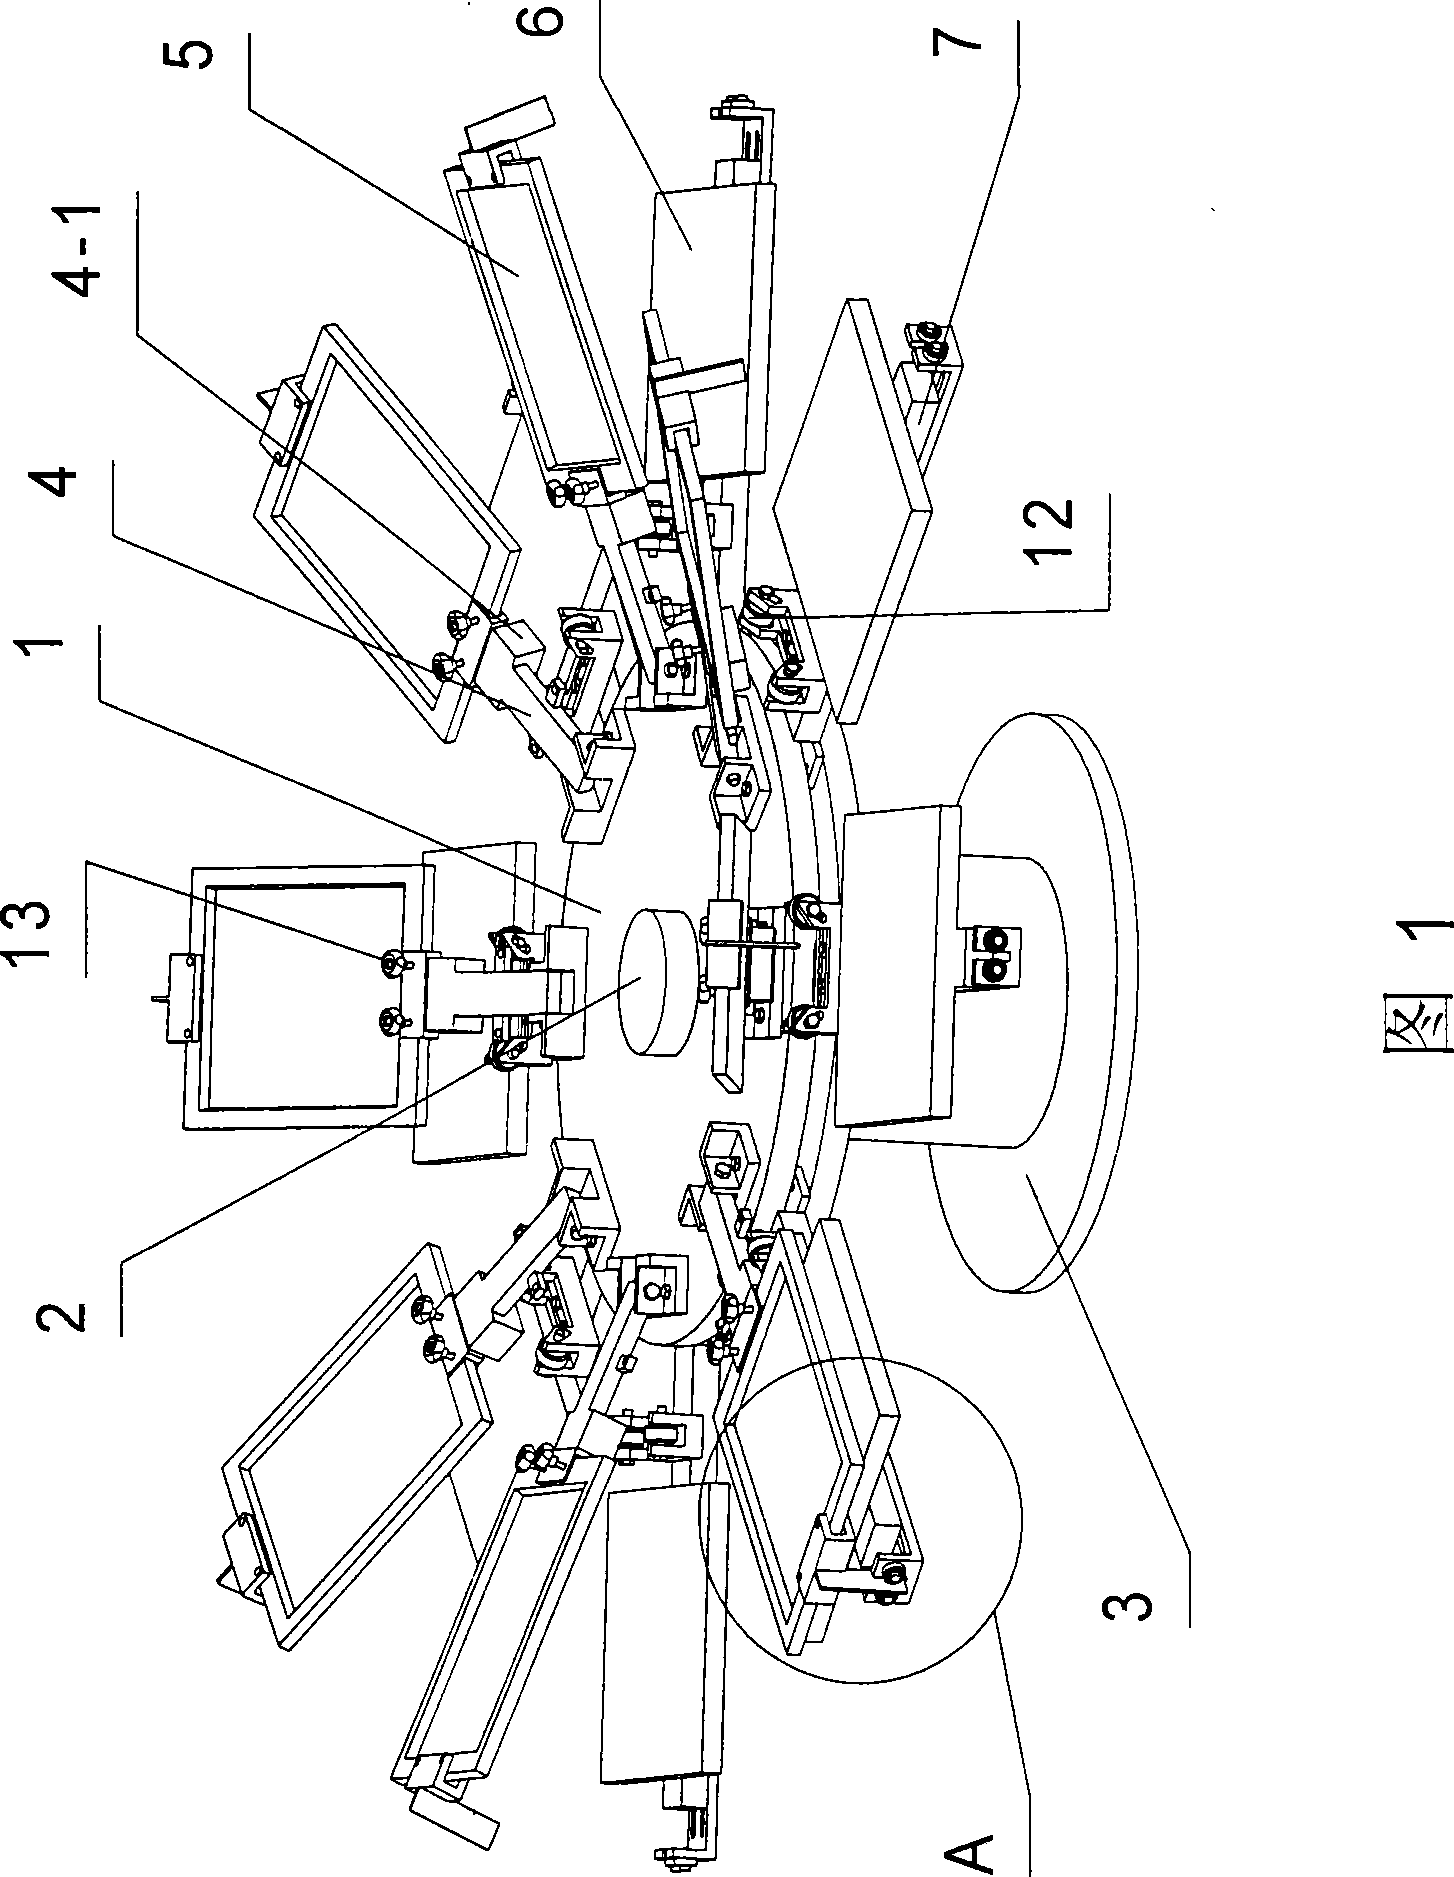 Positioning device for manual silk-screen wheel transfer printing machine